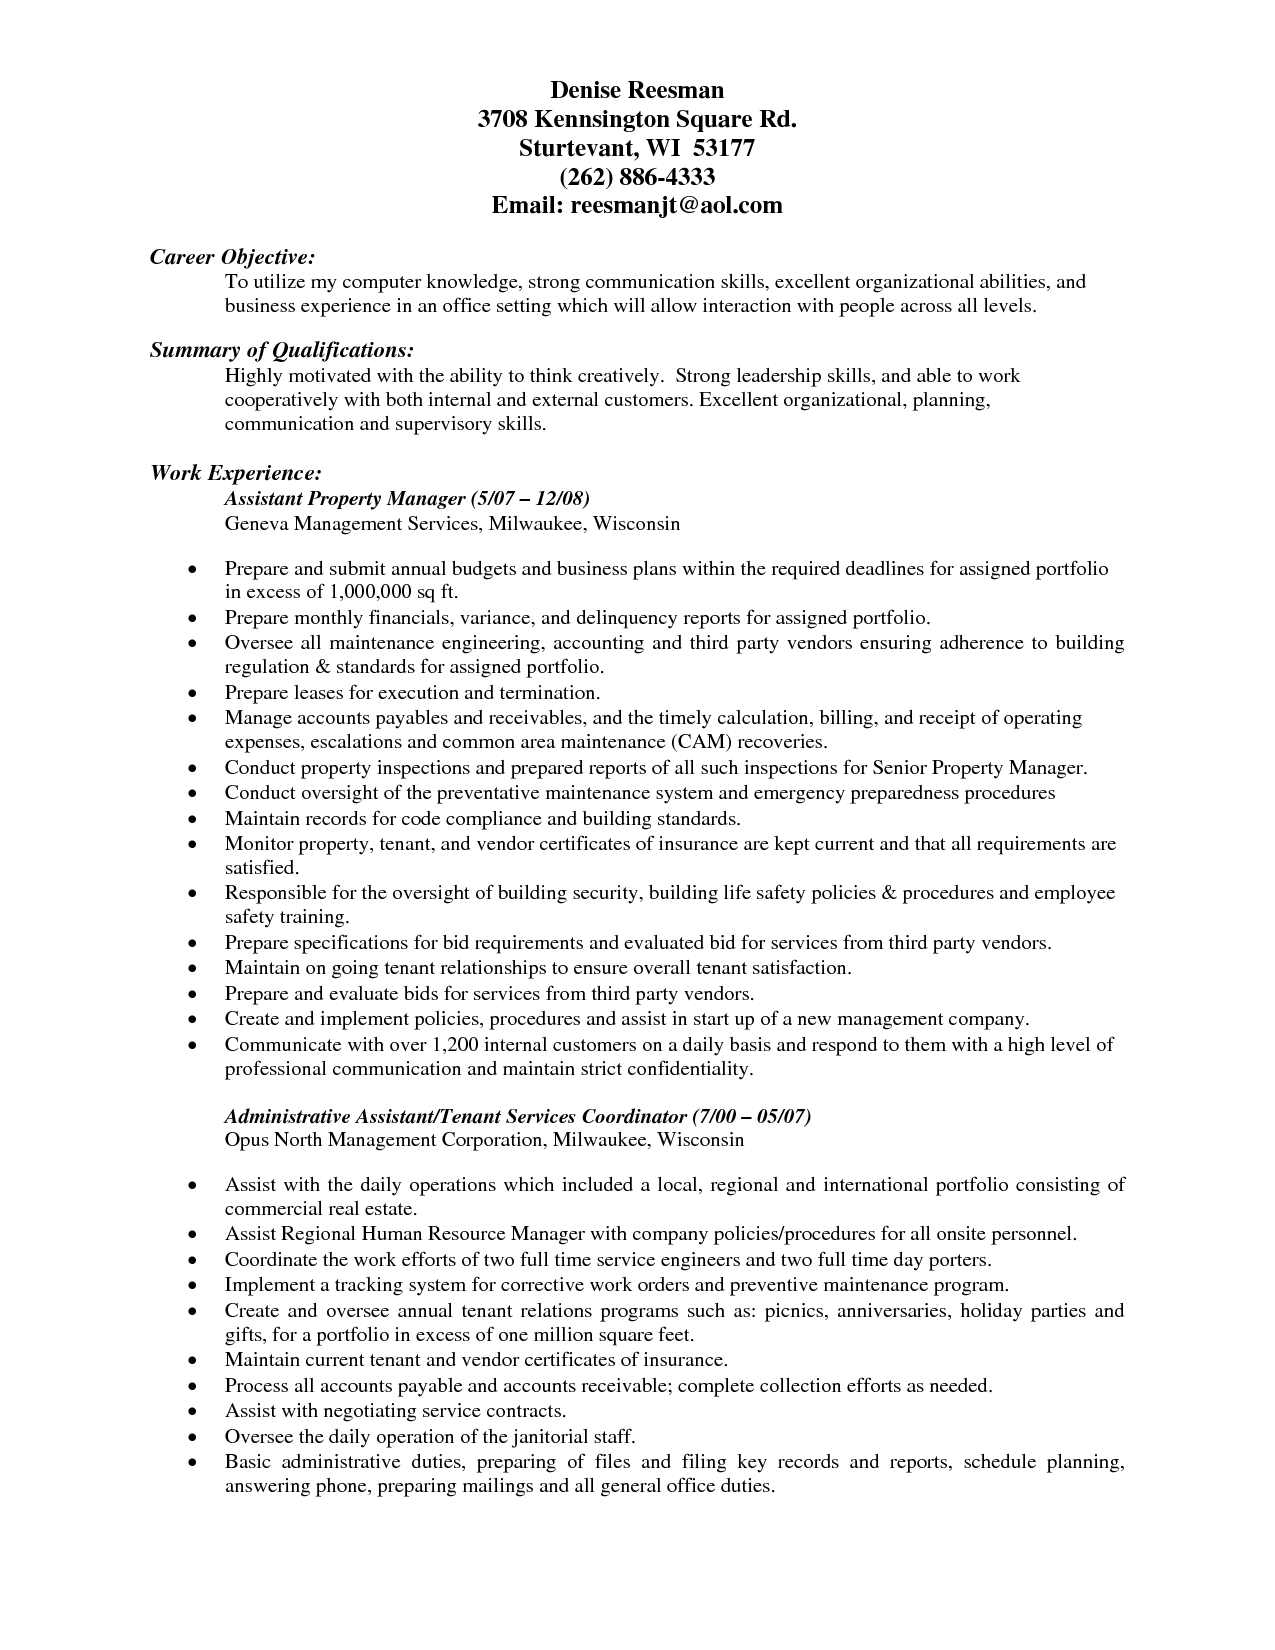 property management resume examples - Sablon Within Property Manager Job Description Template Regarding Property Manager Job Description Template